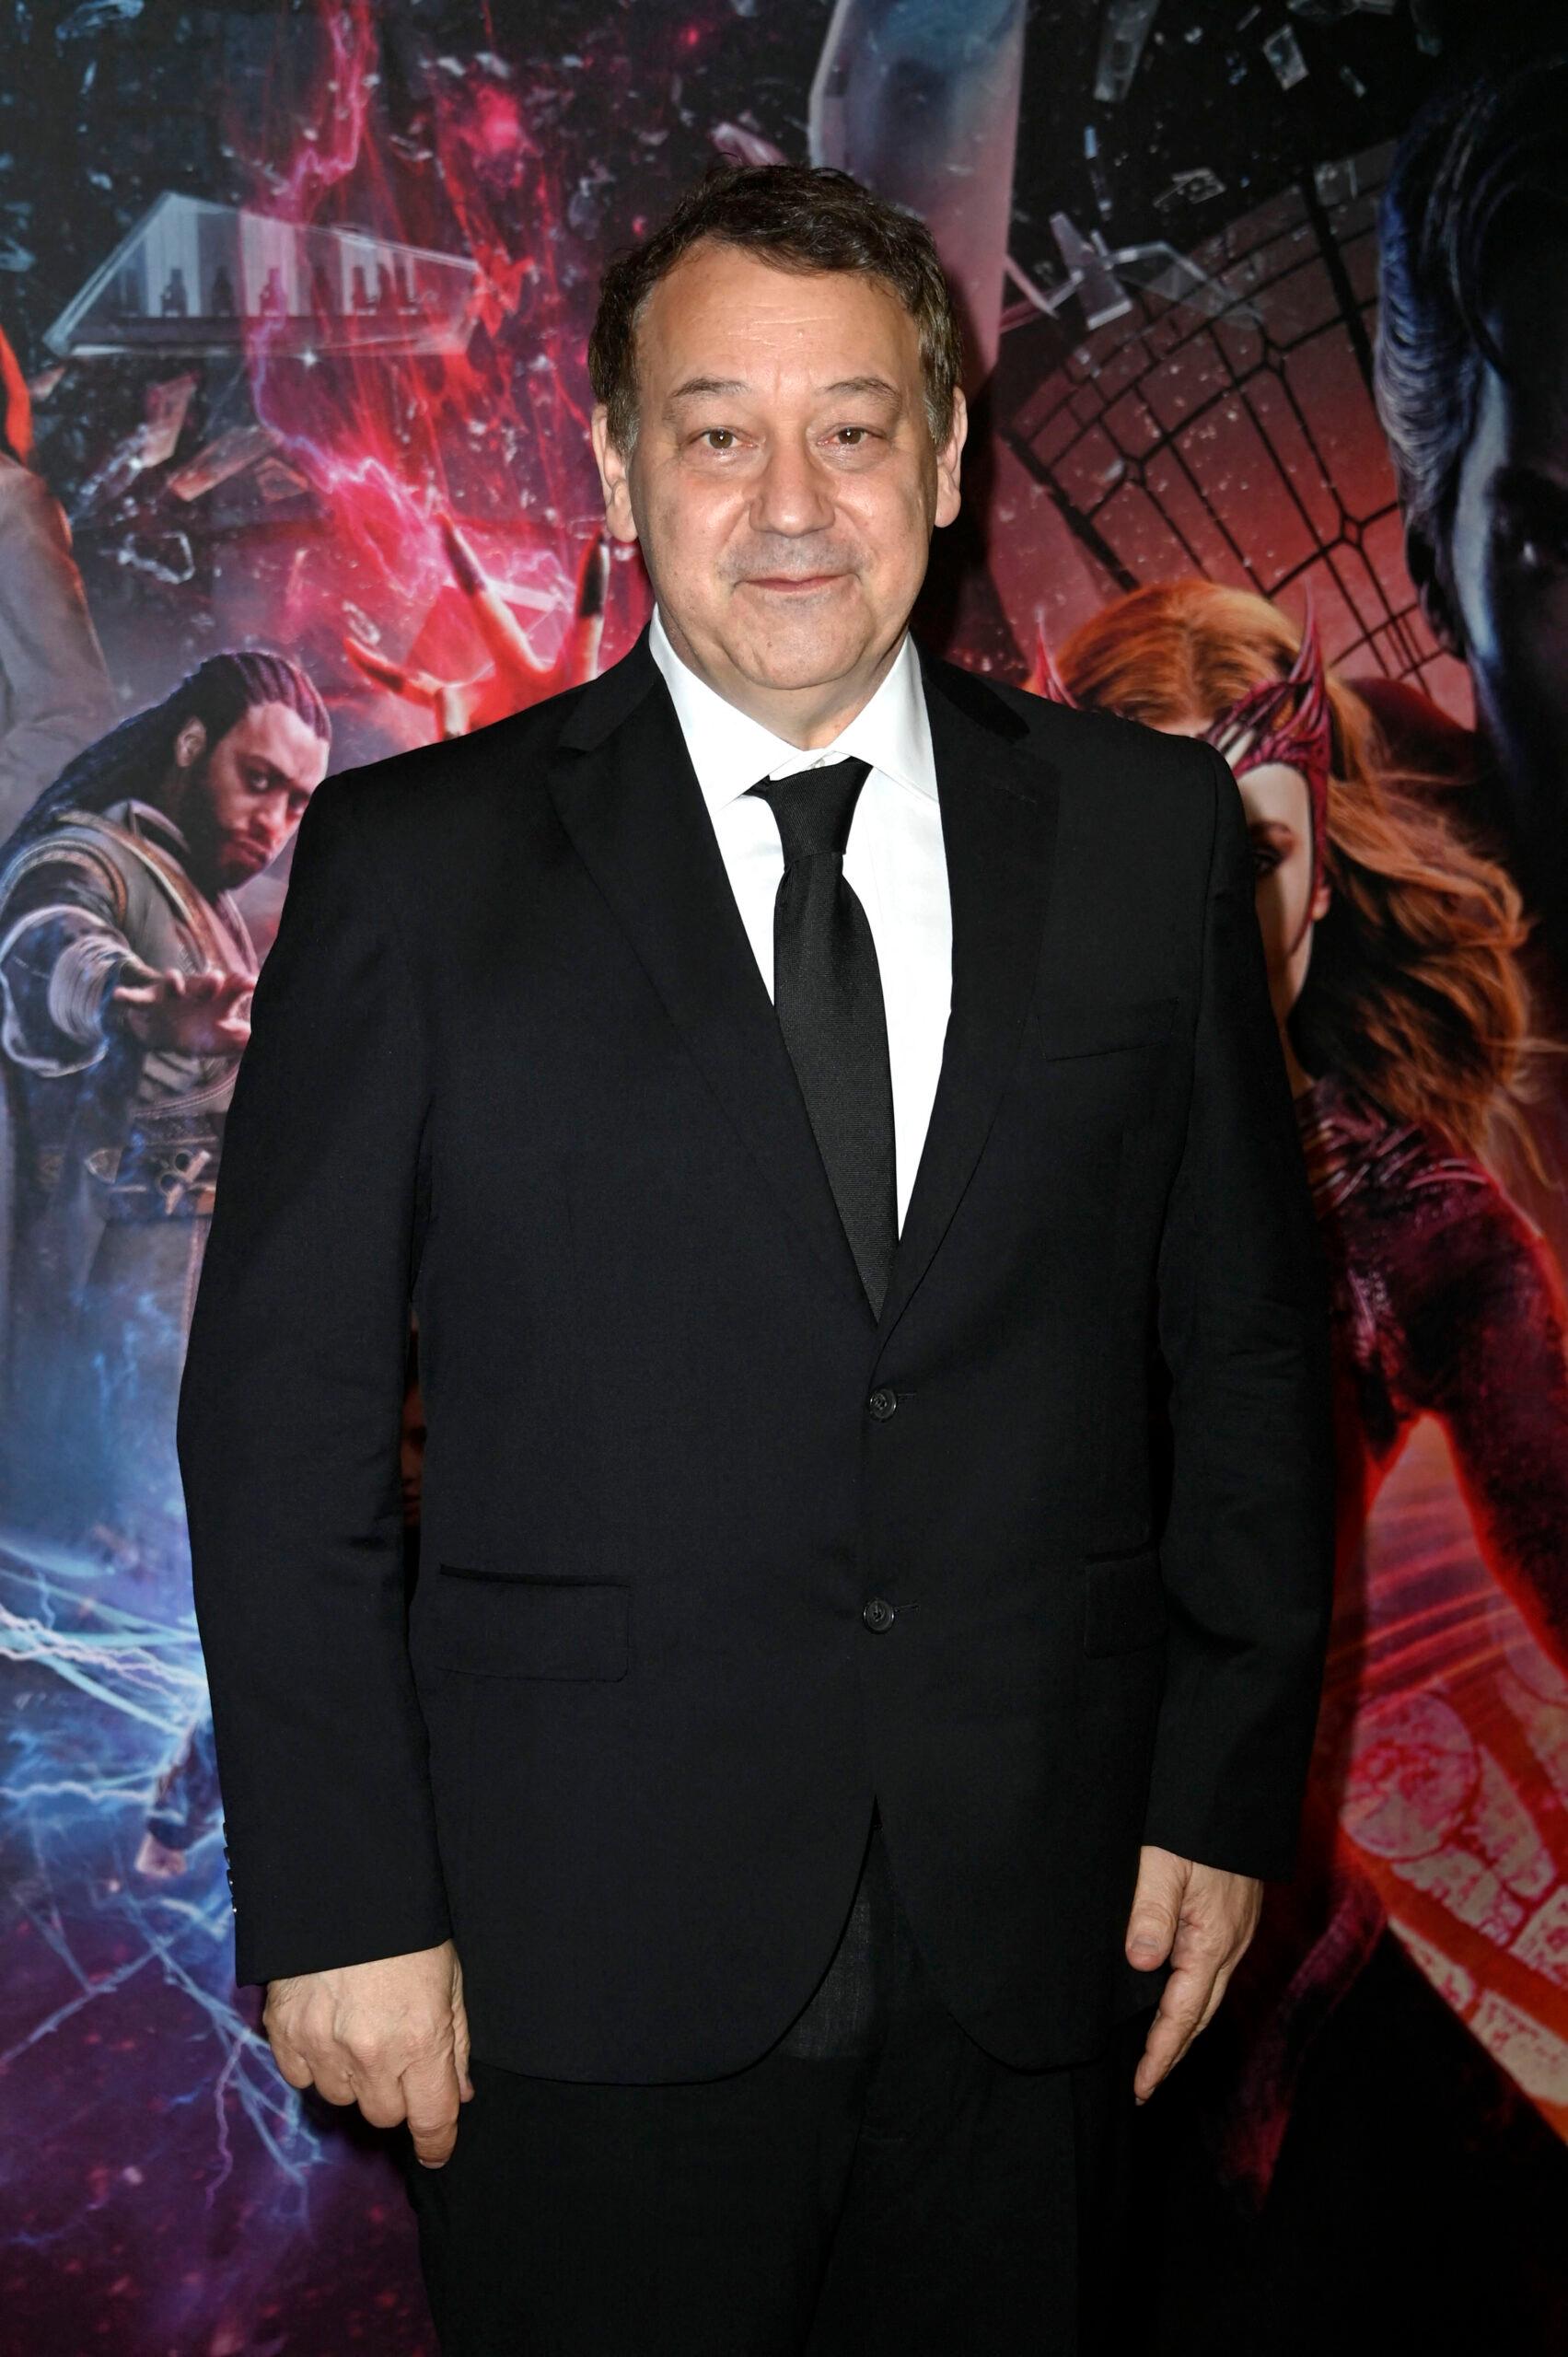 Director Sam Raimi's Wife Files For Divorce After 30 Years, Demands Spousal Support